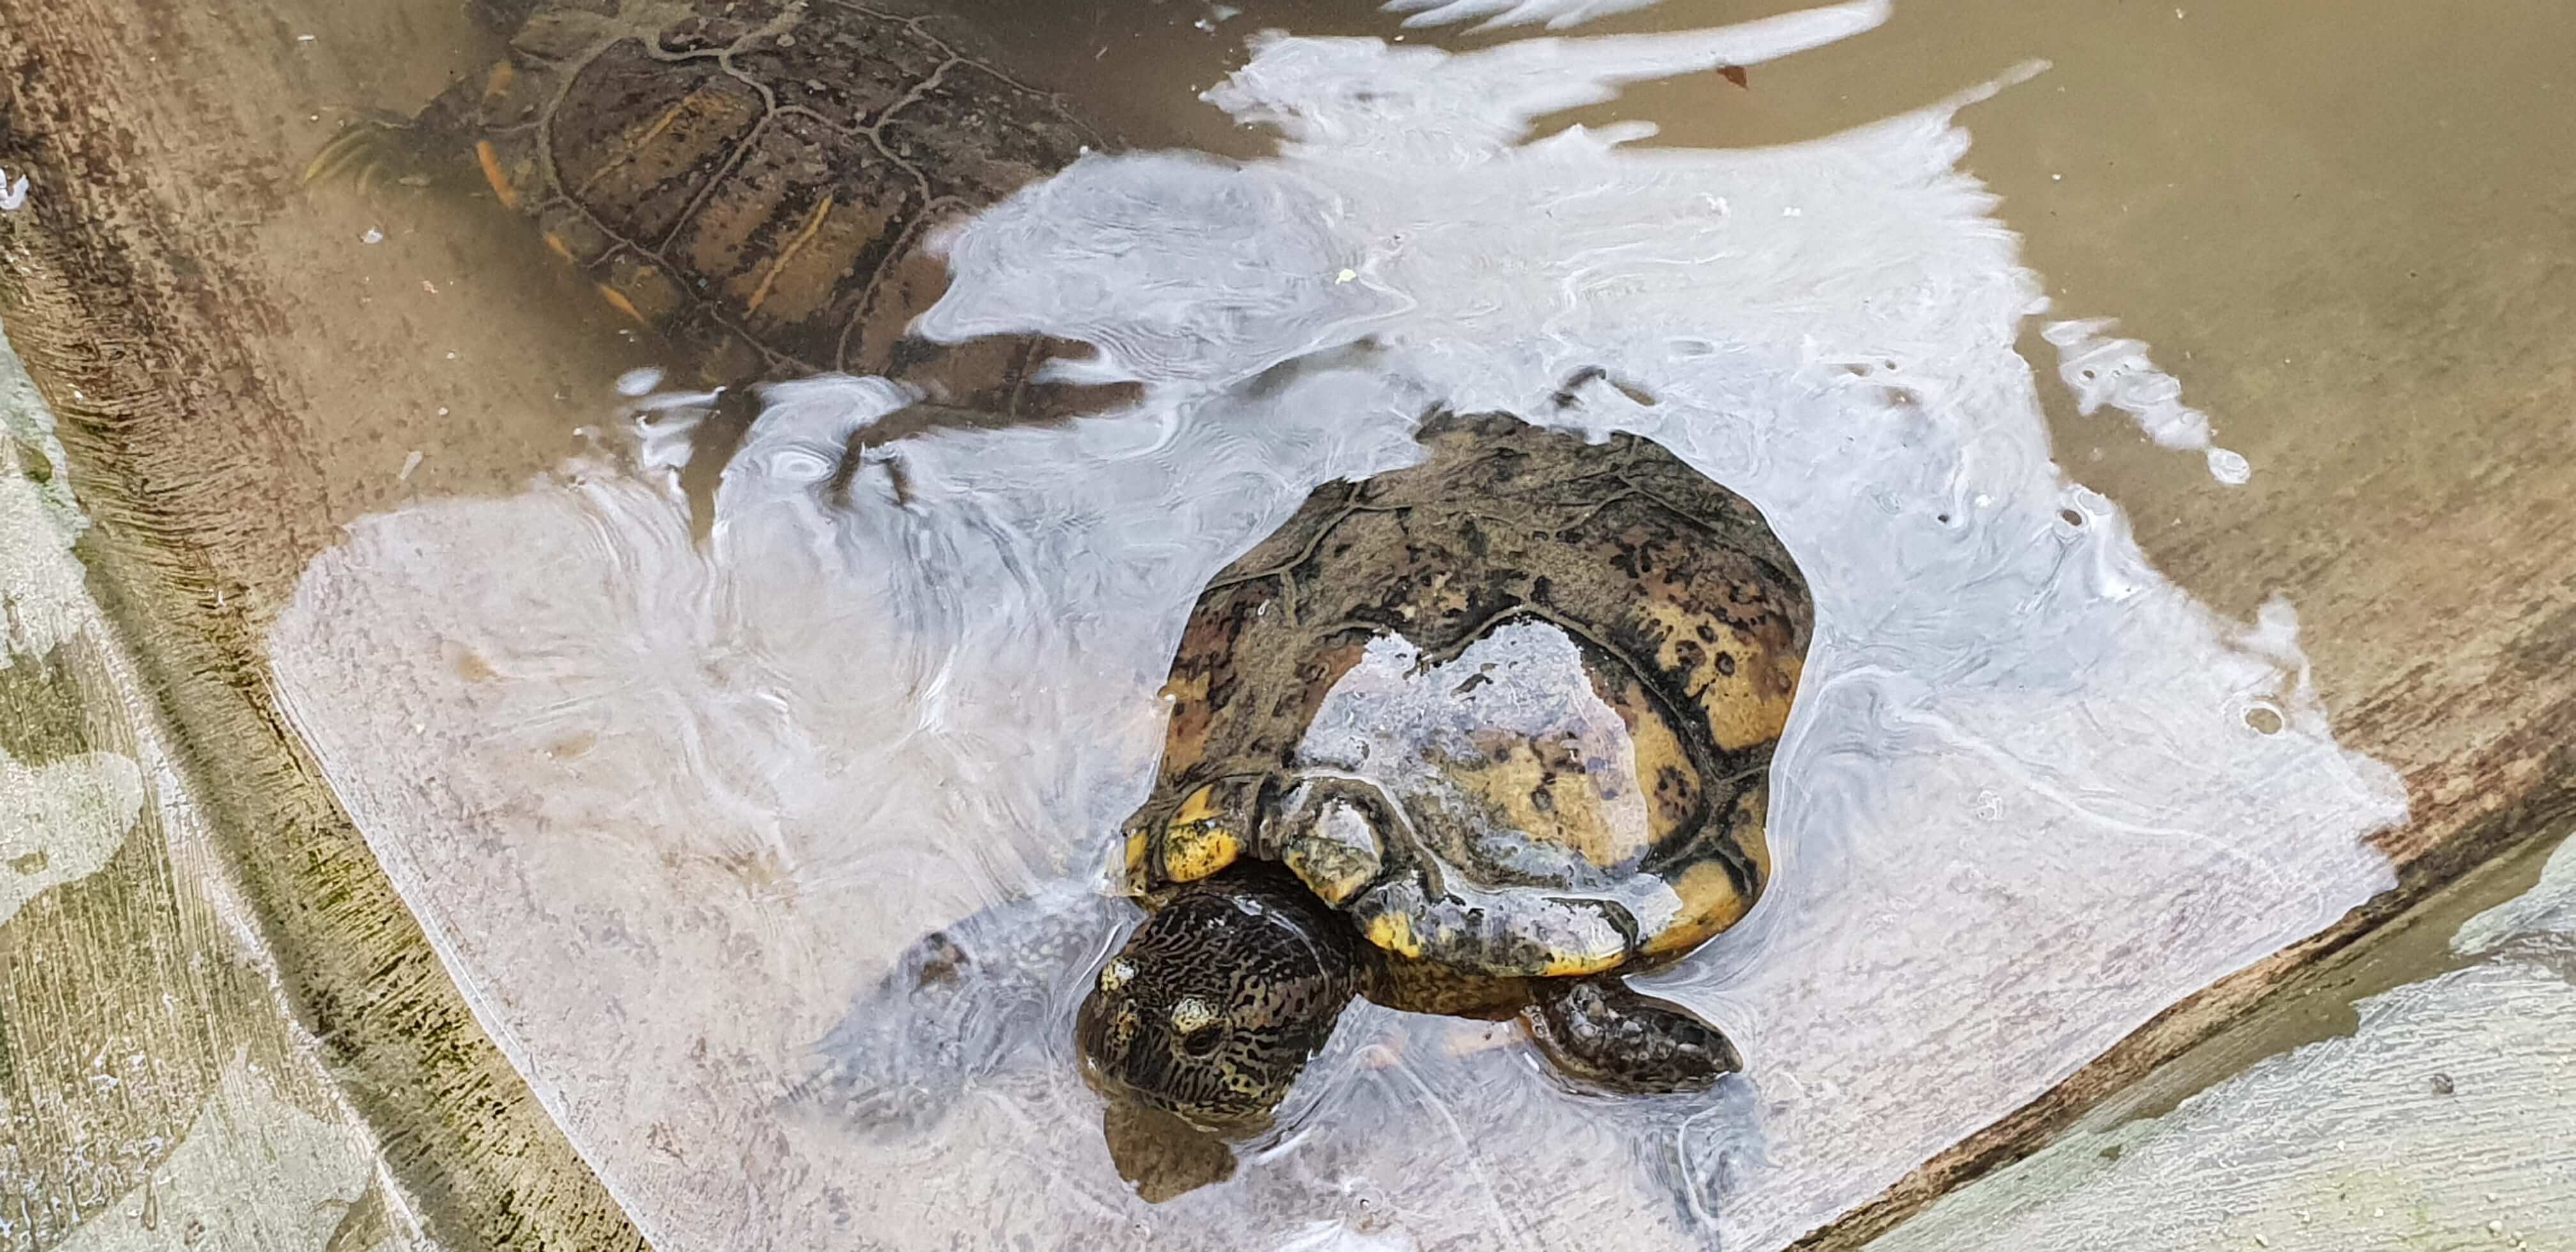 A small turtle enjoying it's time in water